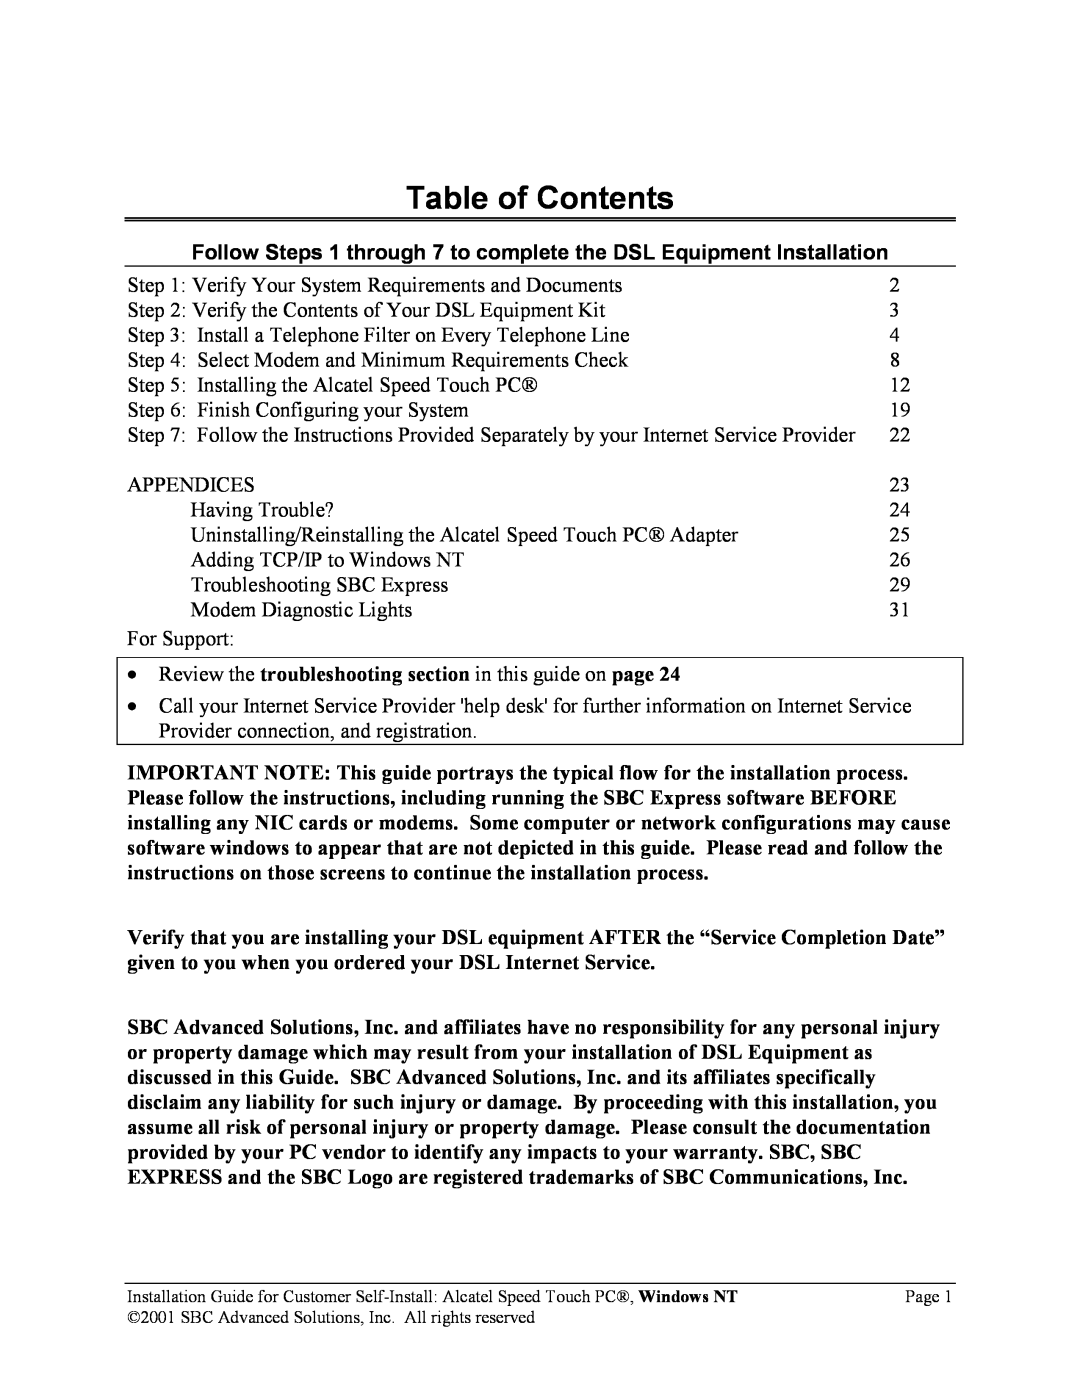 SBC comm PCNT02 manual Table of Contents, Follow Steps 1 through 7 to complete the DSL Equipment Installation 